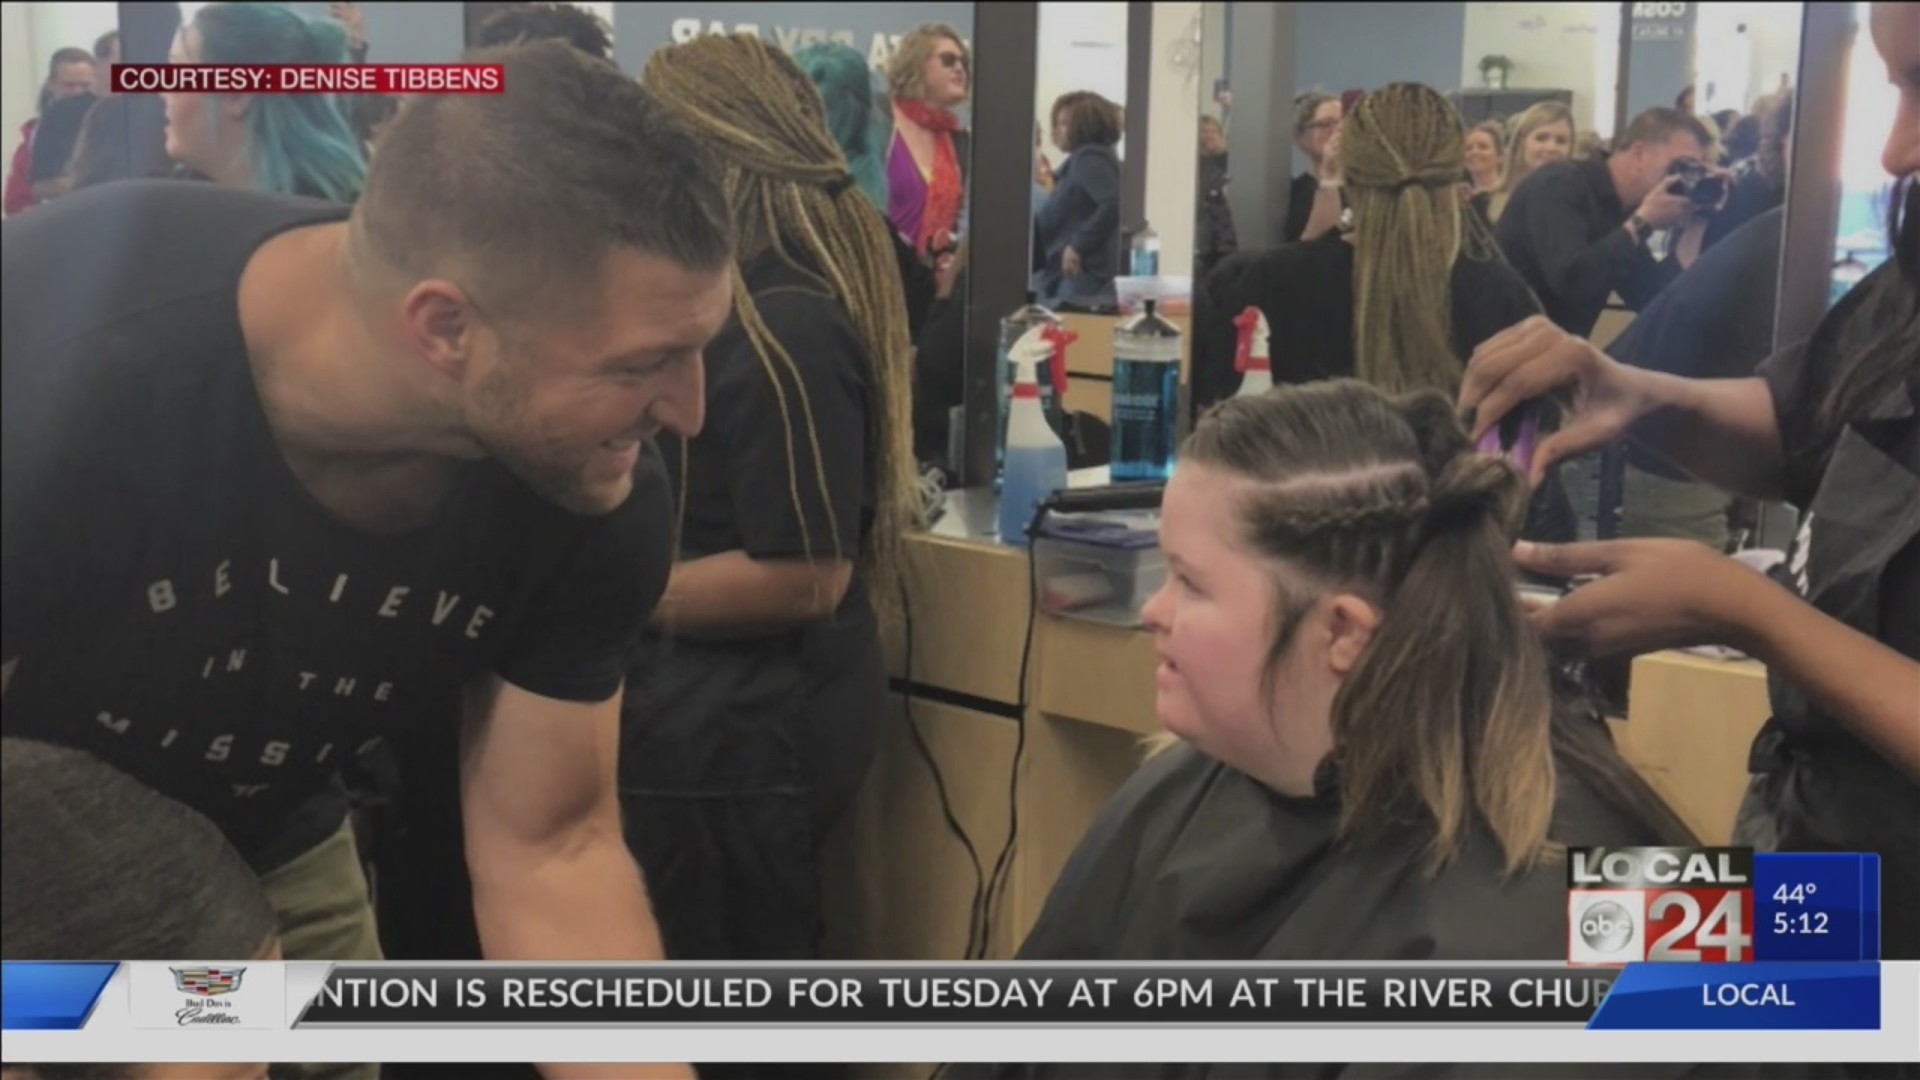 Tim Tebow makes stop in Mid-South ahead of his foundation's "Night to Shine" events